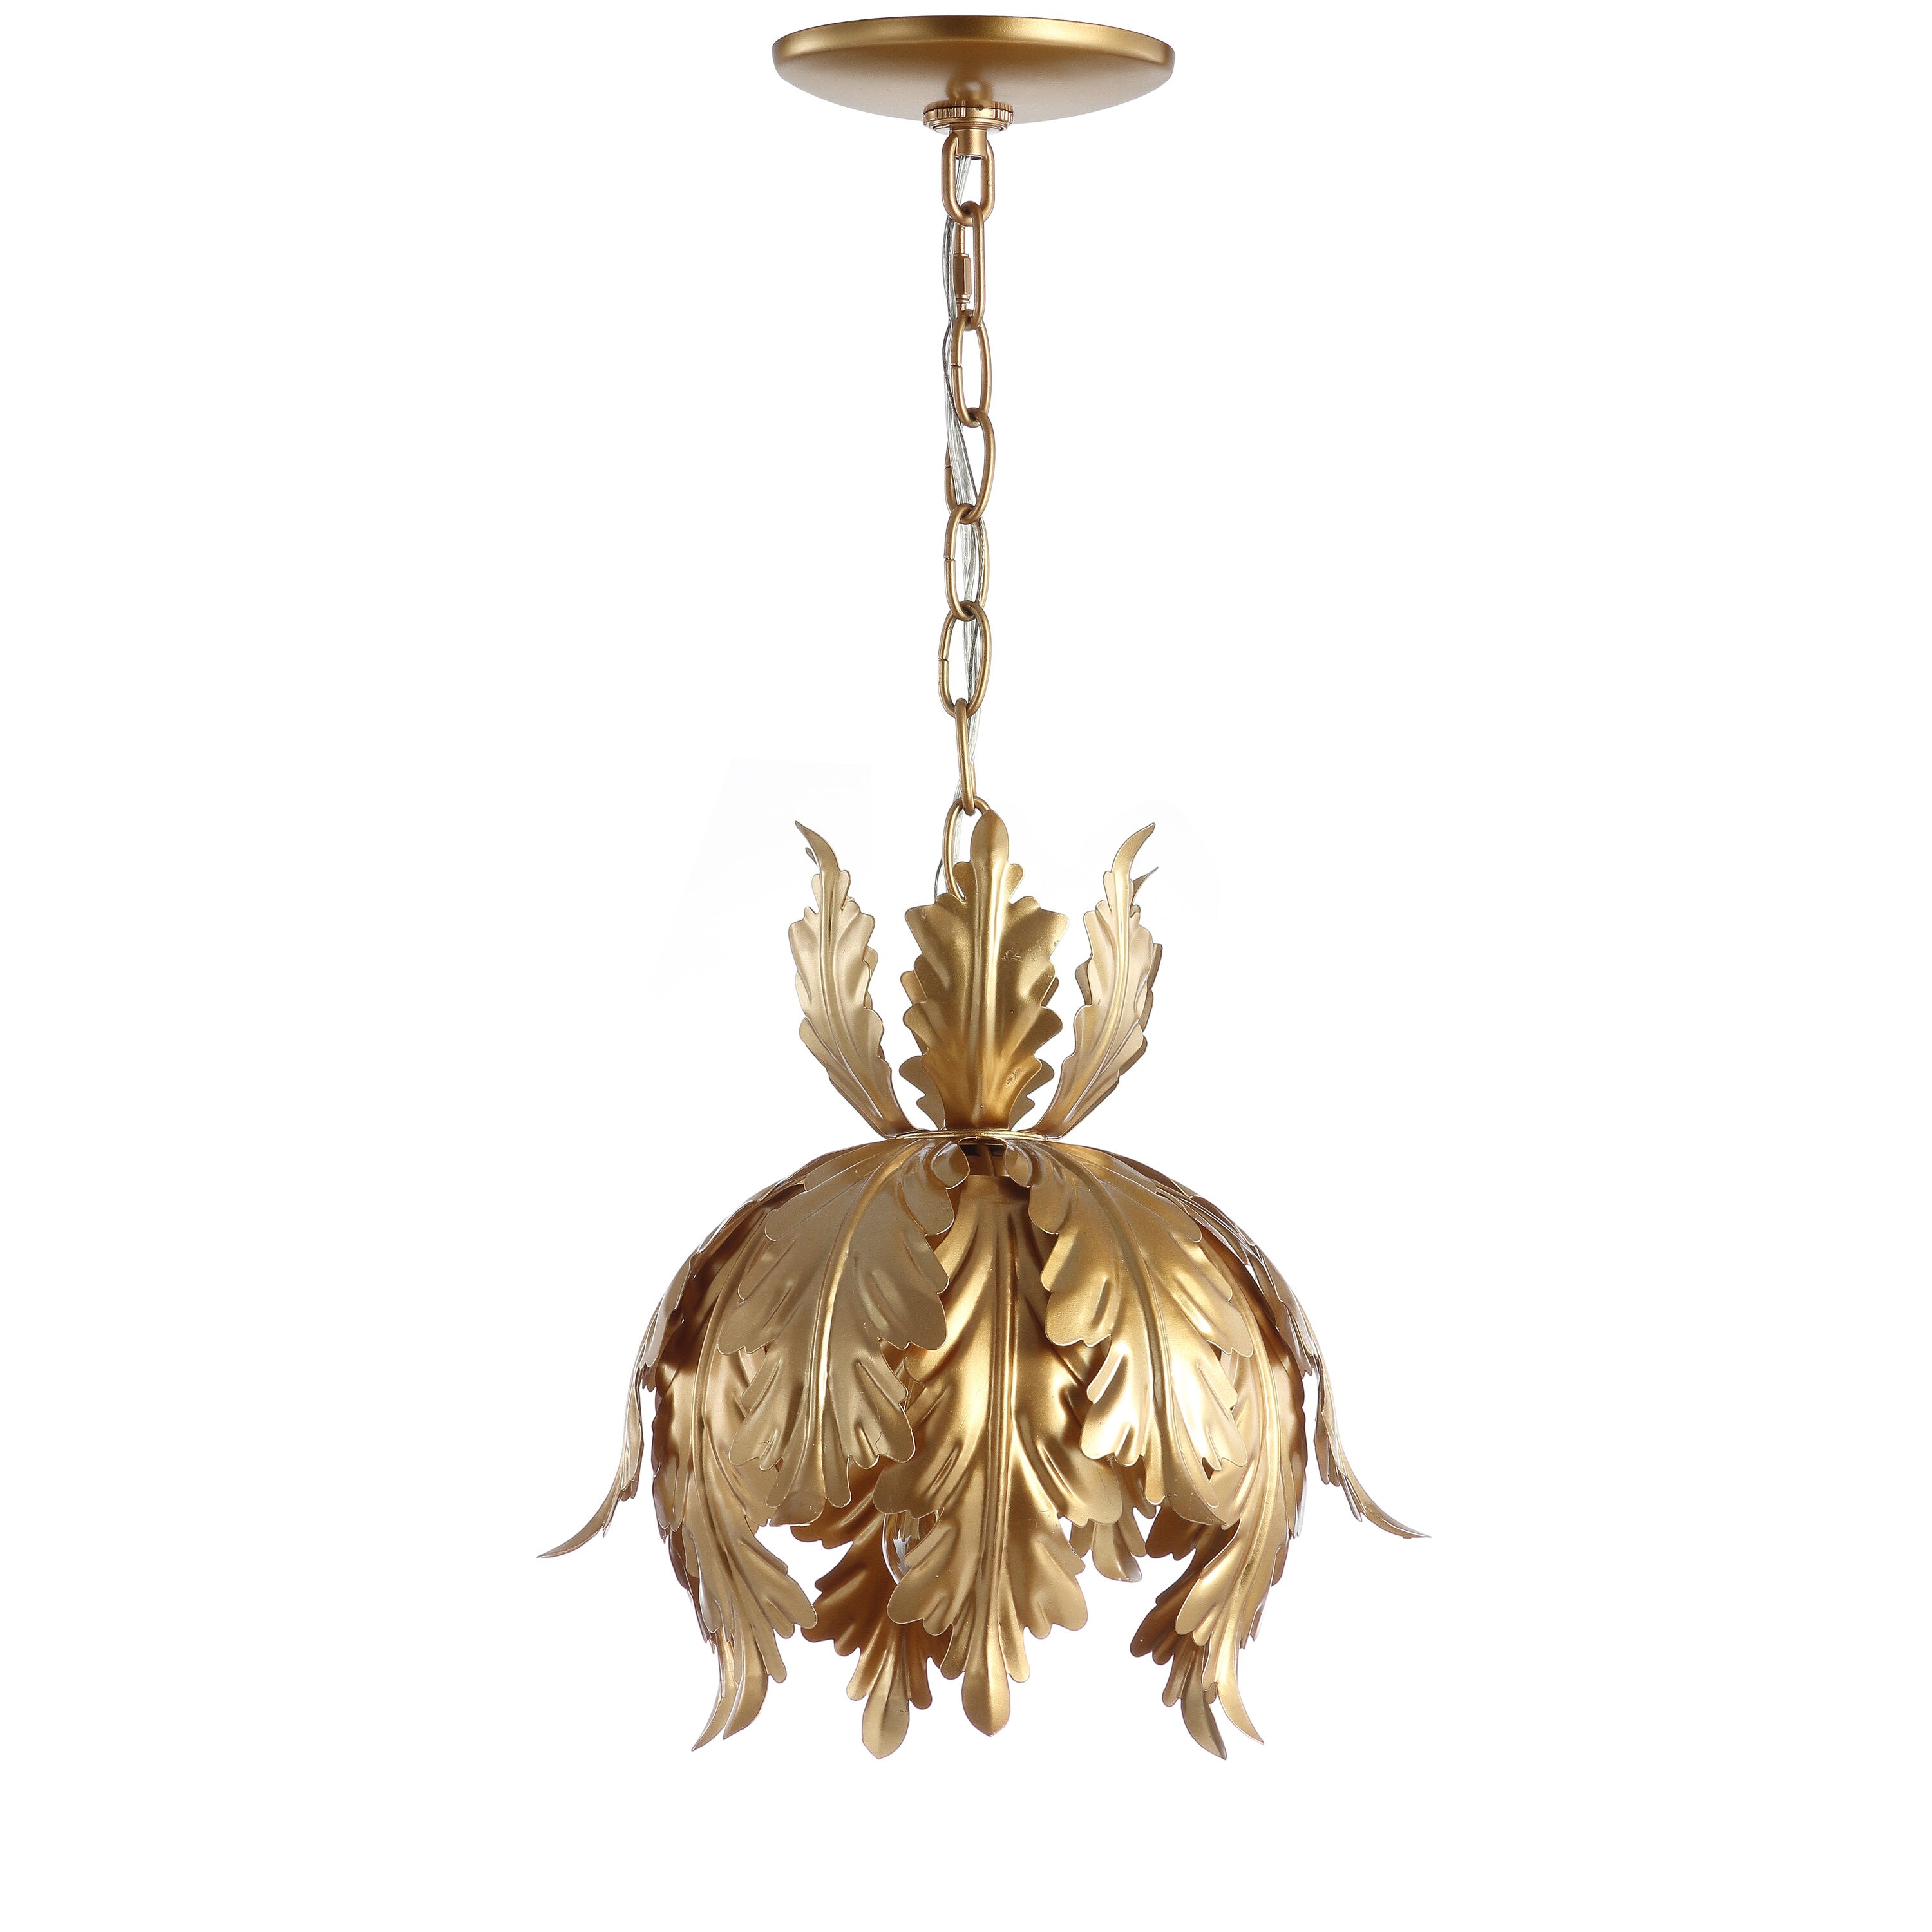 4 X 6 Metal Feather Frame Light Gold - Opalhouse™ : Target